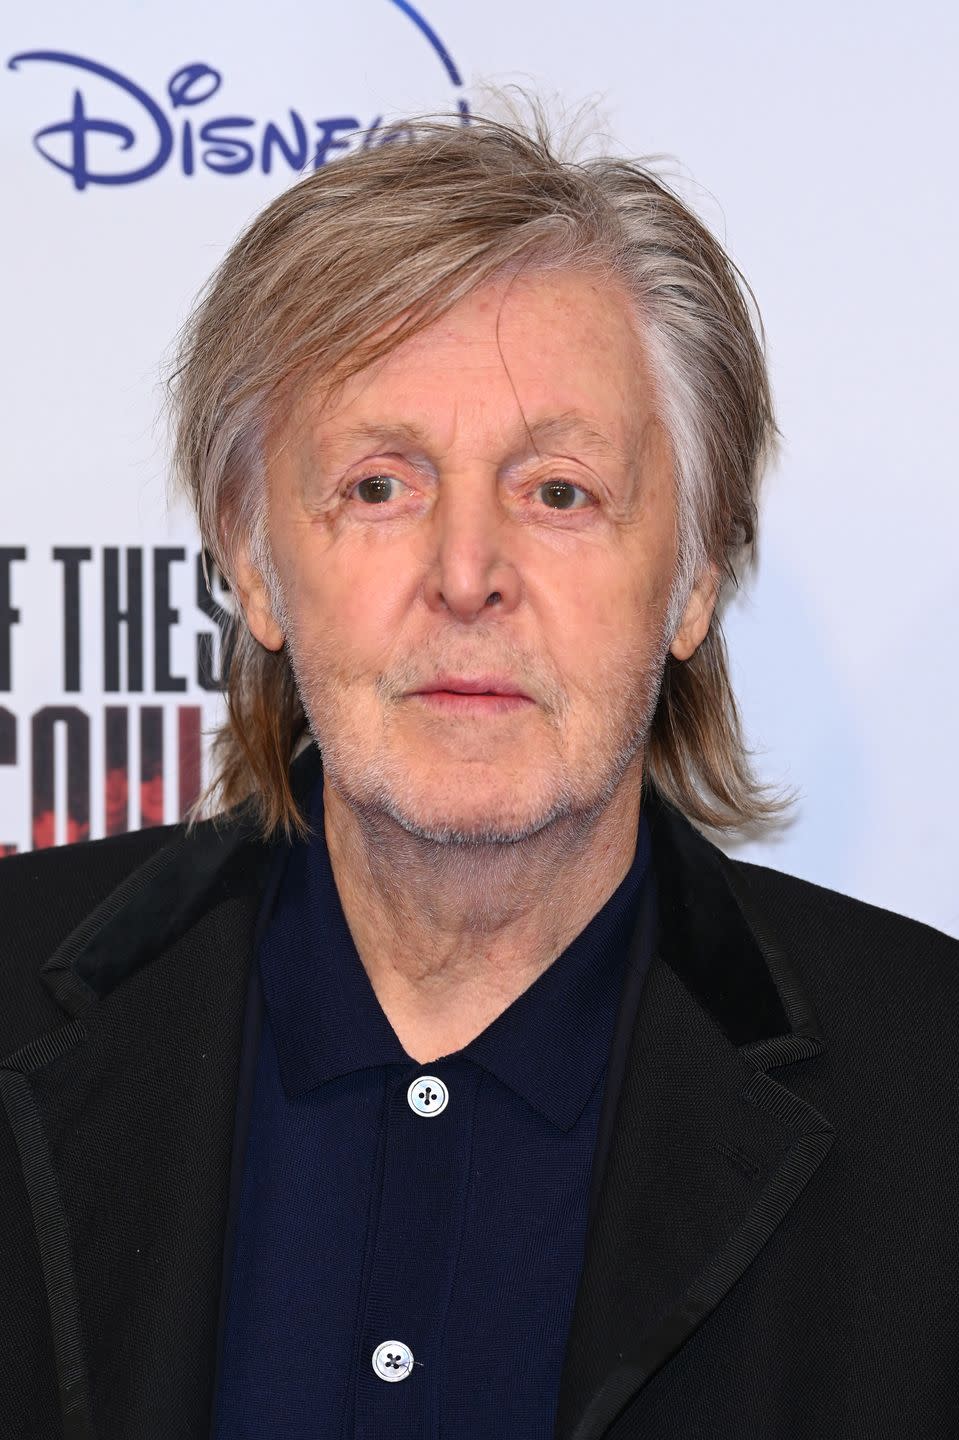 <p>On January 16, 1980 the Beatles frontman was arrested at a Tokyo airport for possession of nearly a half pound of marijuana after arriving in Japan to embark on an 11-city tour alongside his band Wings. The high quantity landed McCartney a smuggling charge, a conviction that could potentially carry a 7 year prison sentence. McCartney would be held in the Tokyo Narcotics Detention Center for 9 days before being deported back to England on January 25, 1980.</p>